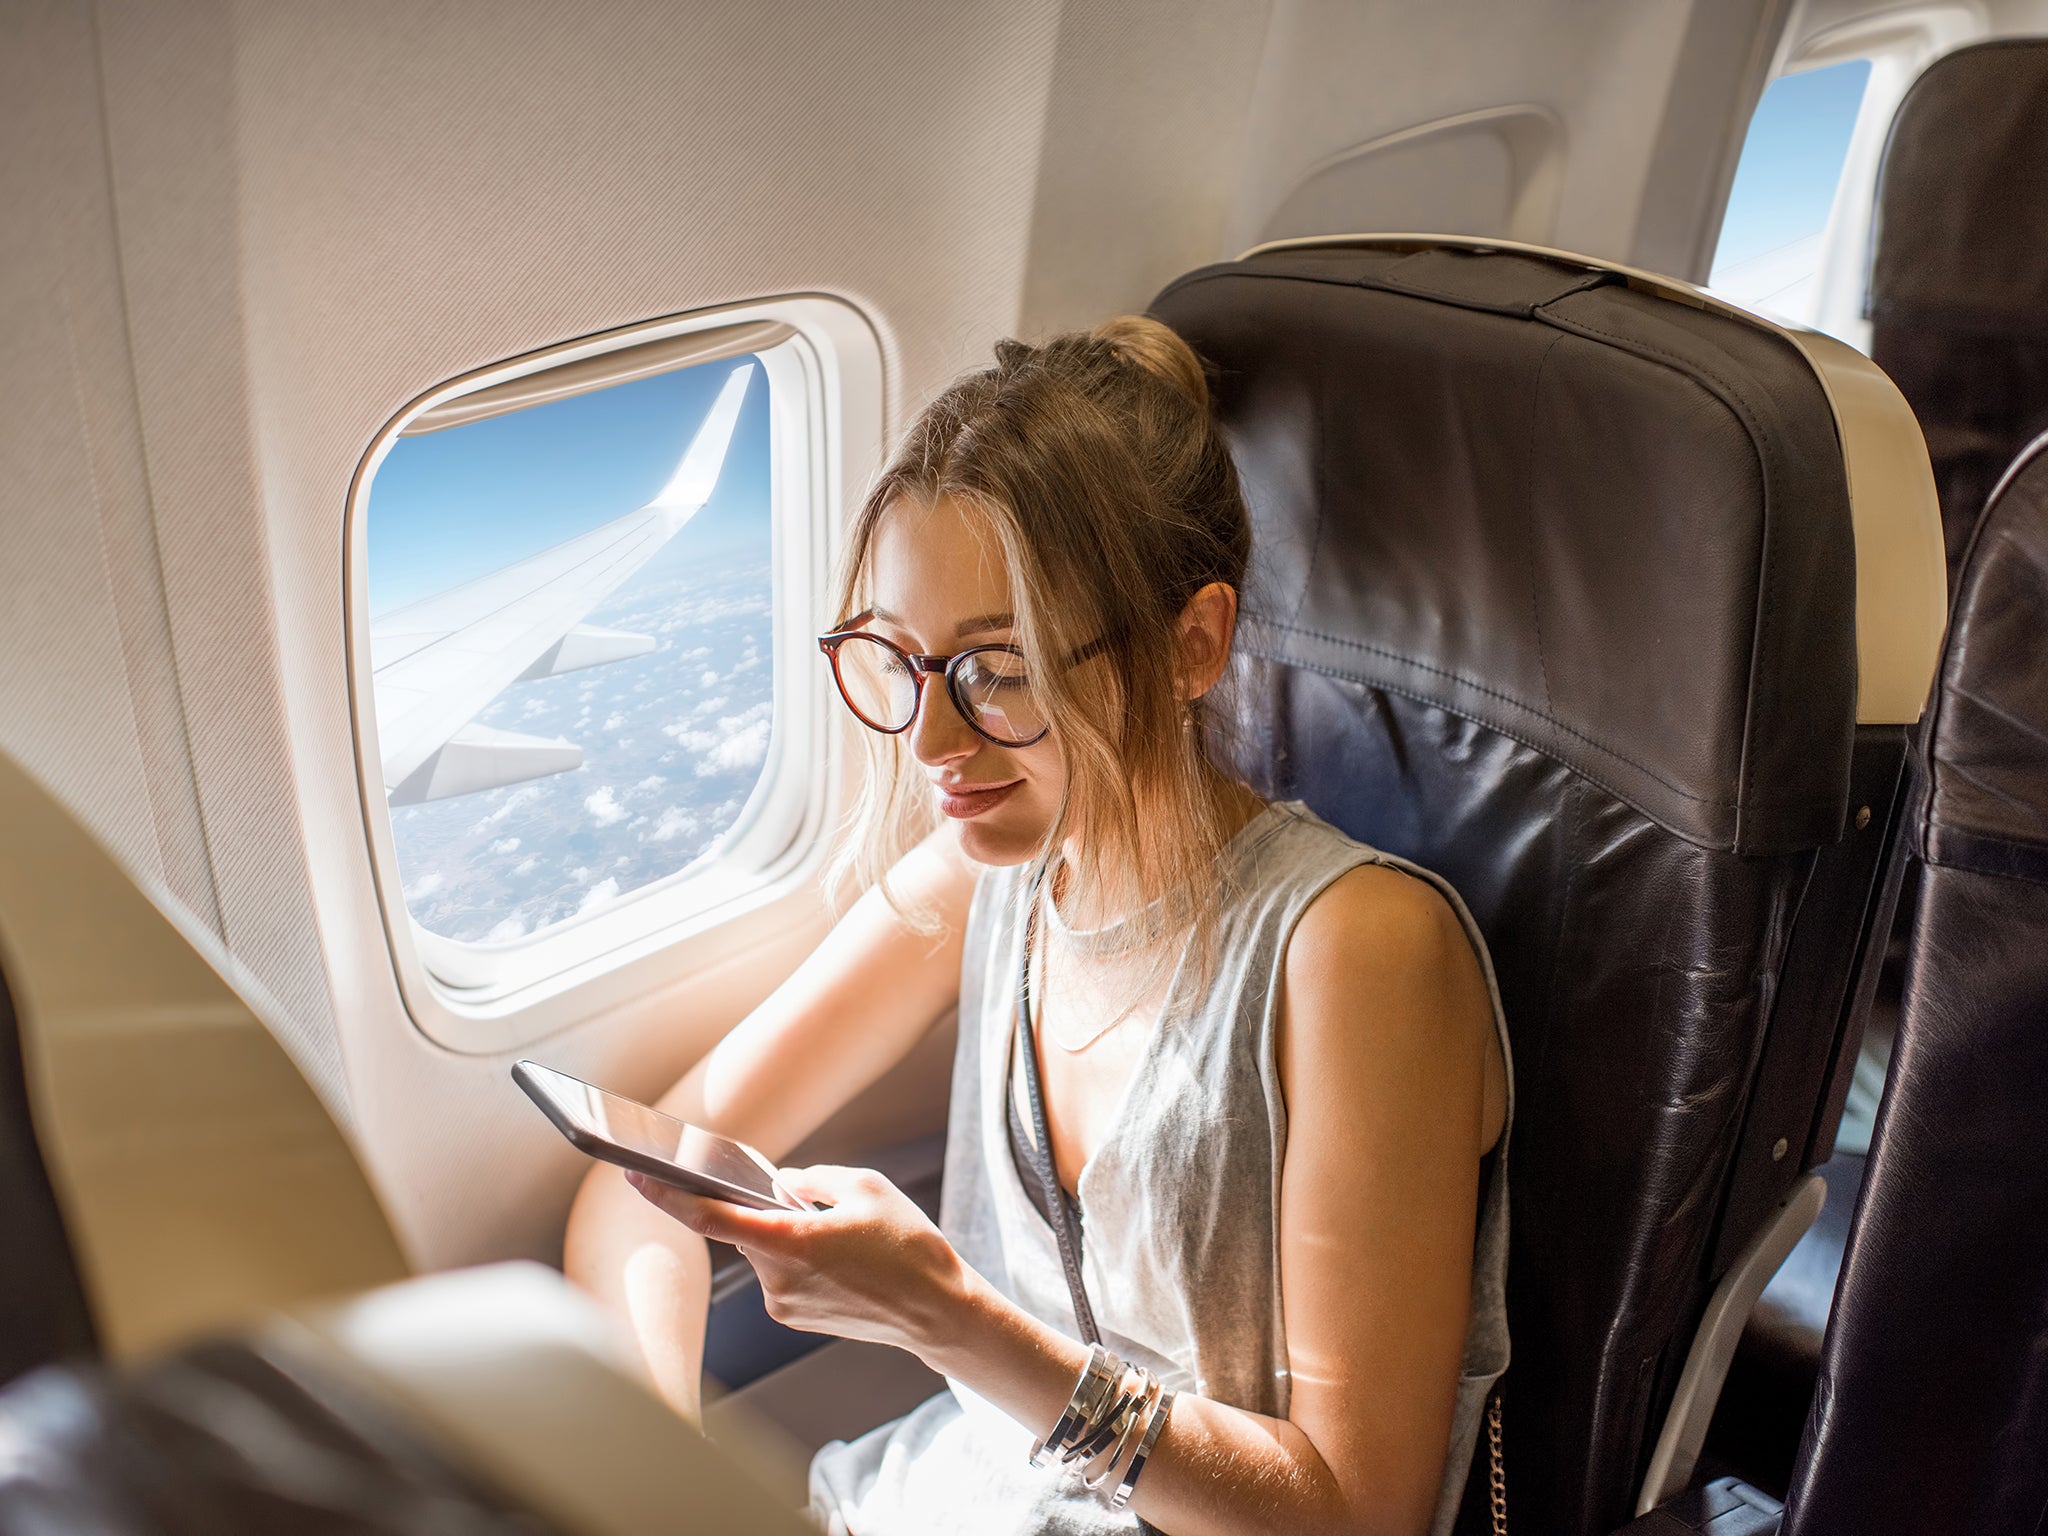 Cabin crew member explains why your phone needs to be in flight